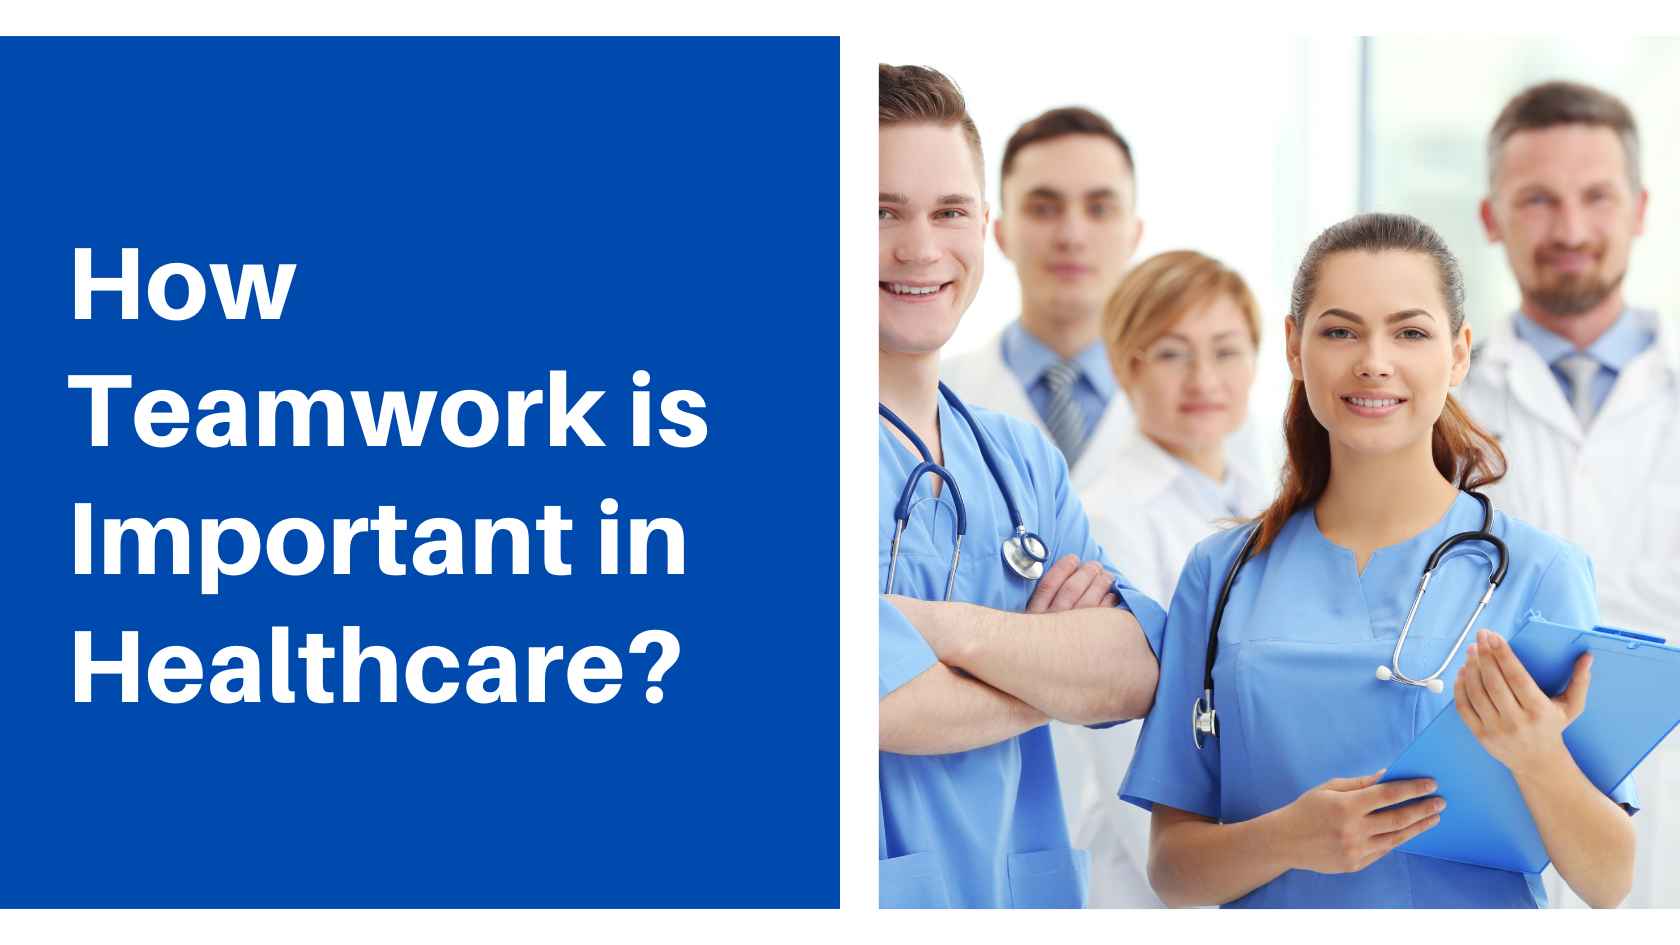 How Teamwork is Important in Healthcare?